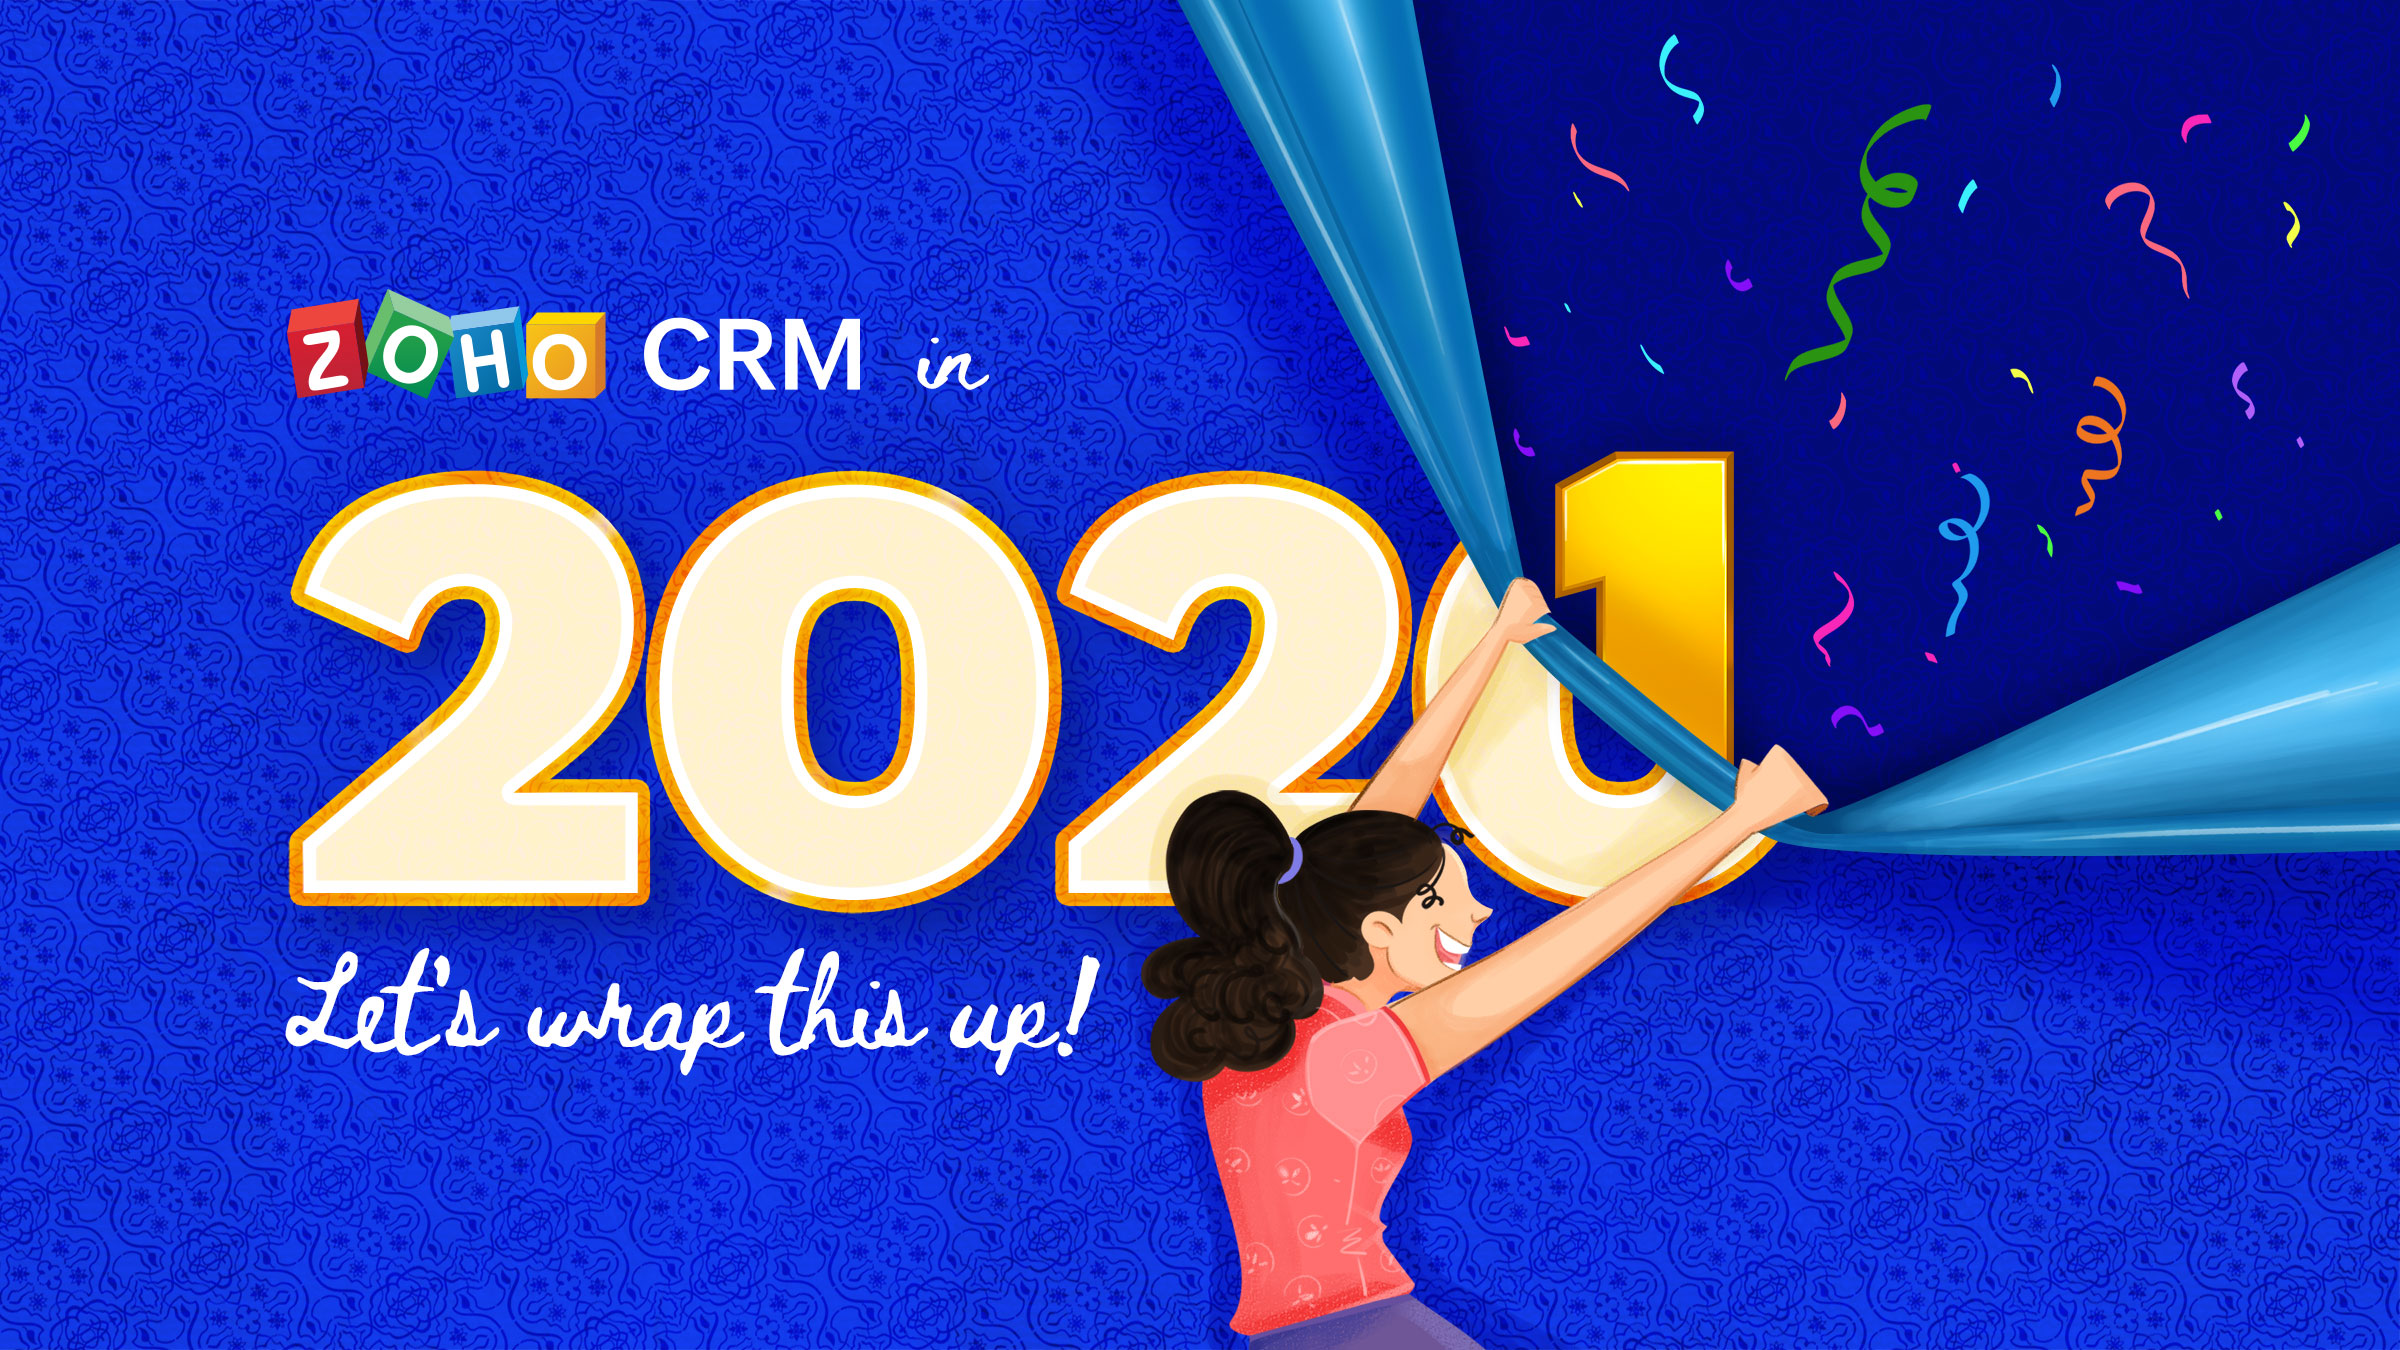 Zoho CRM in 2020 - A Year In Review